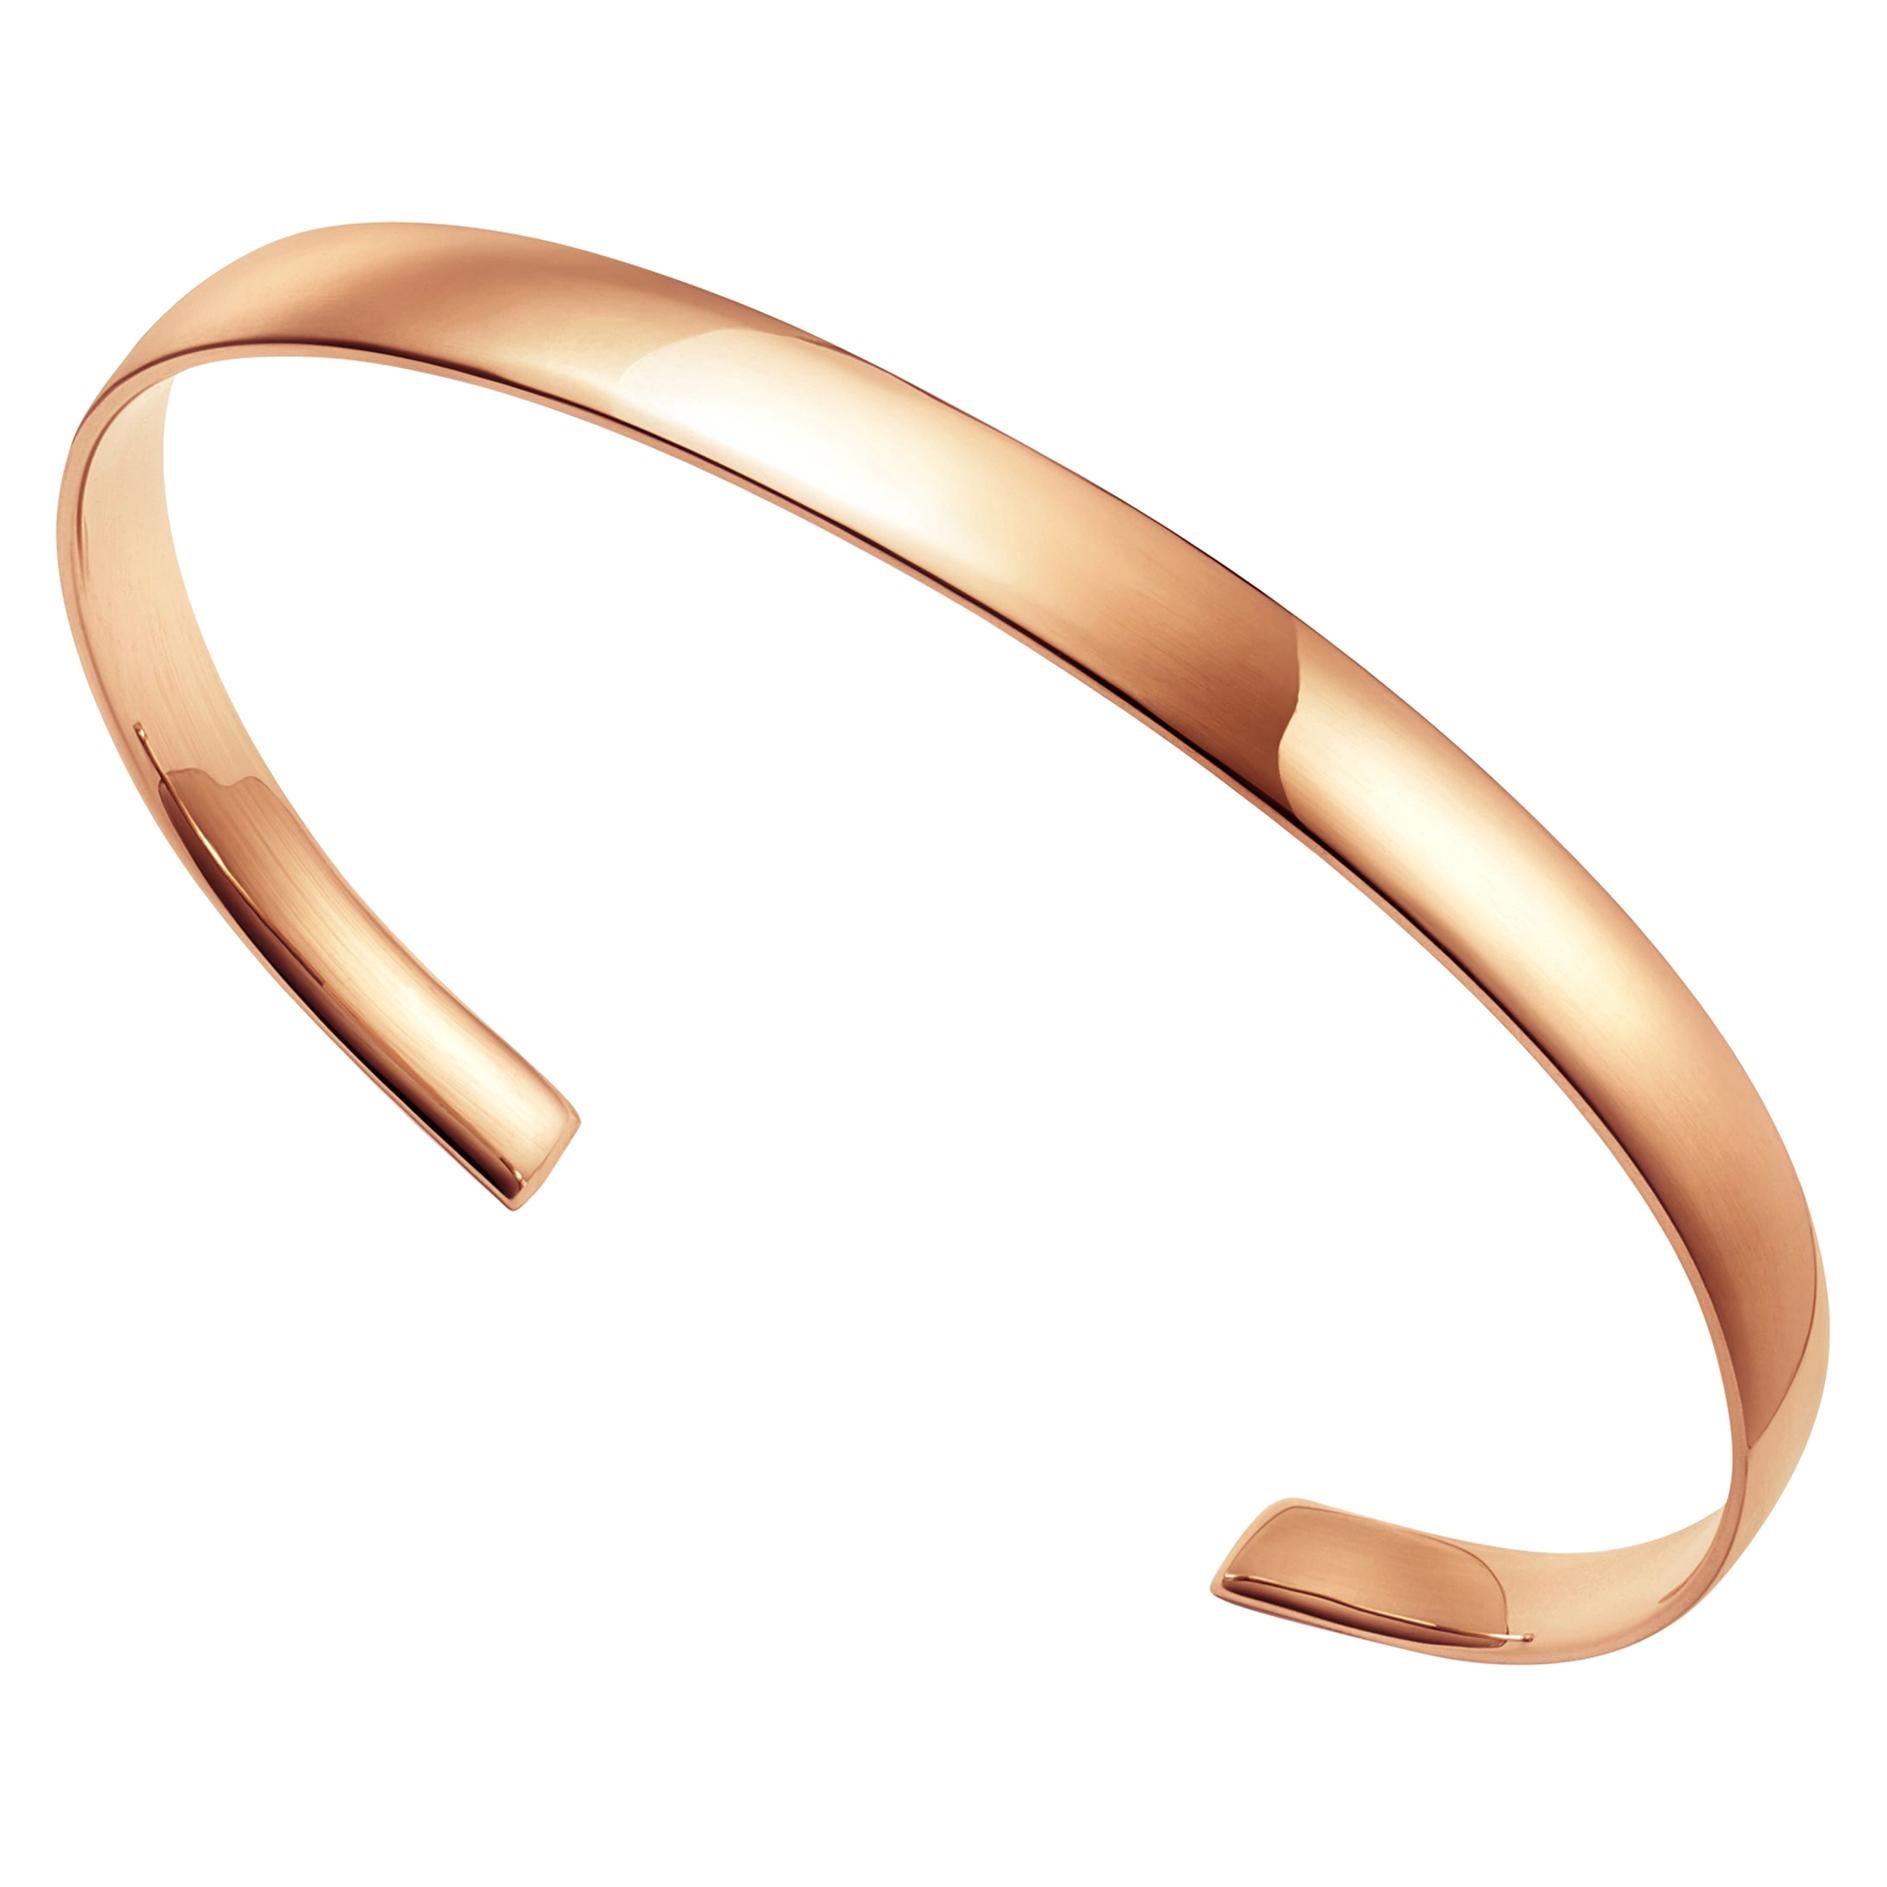 18kt Fairmined Ecological Rose Gold Classic Rounded Sincerity Cuff Bracelet